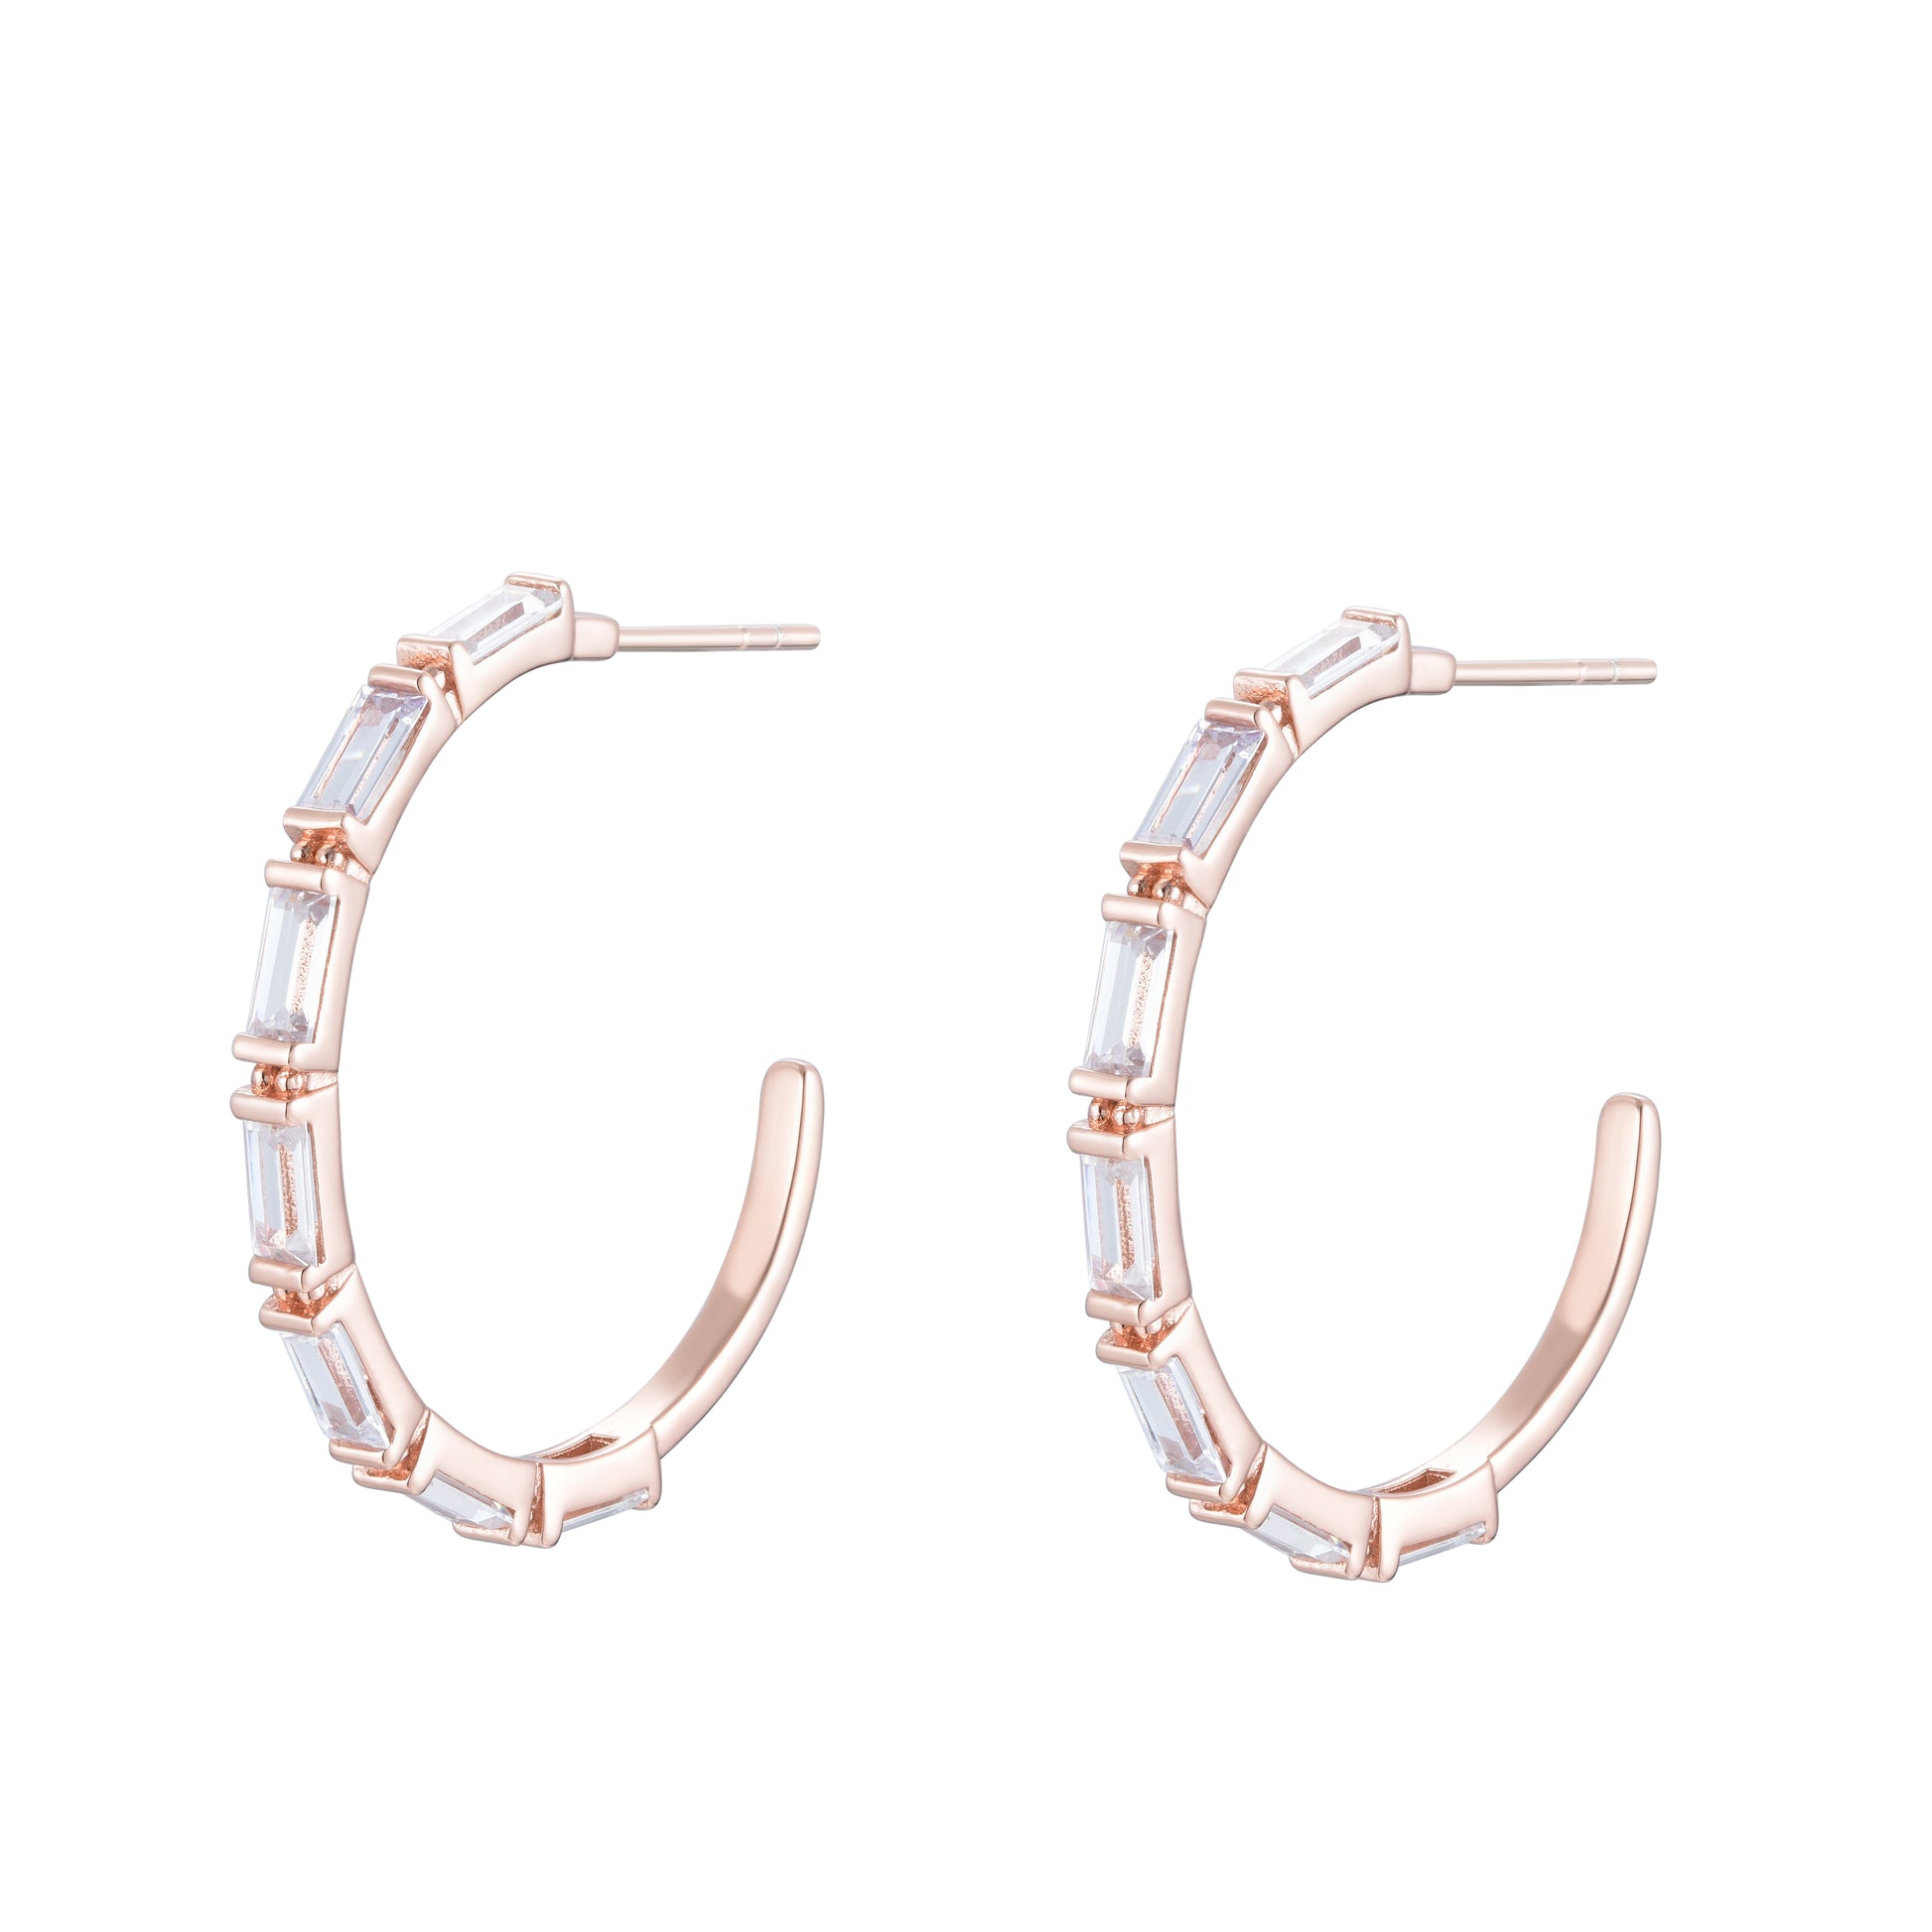 
Rose Gold Plated Open Hoop Earrings set with Baguette-style Cubic Zirconia

